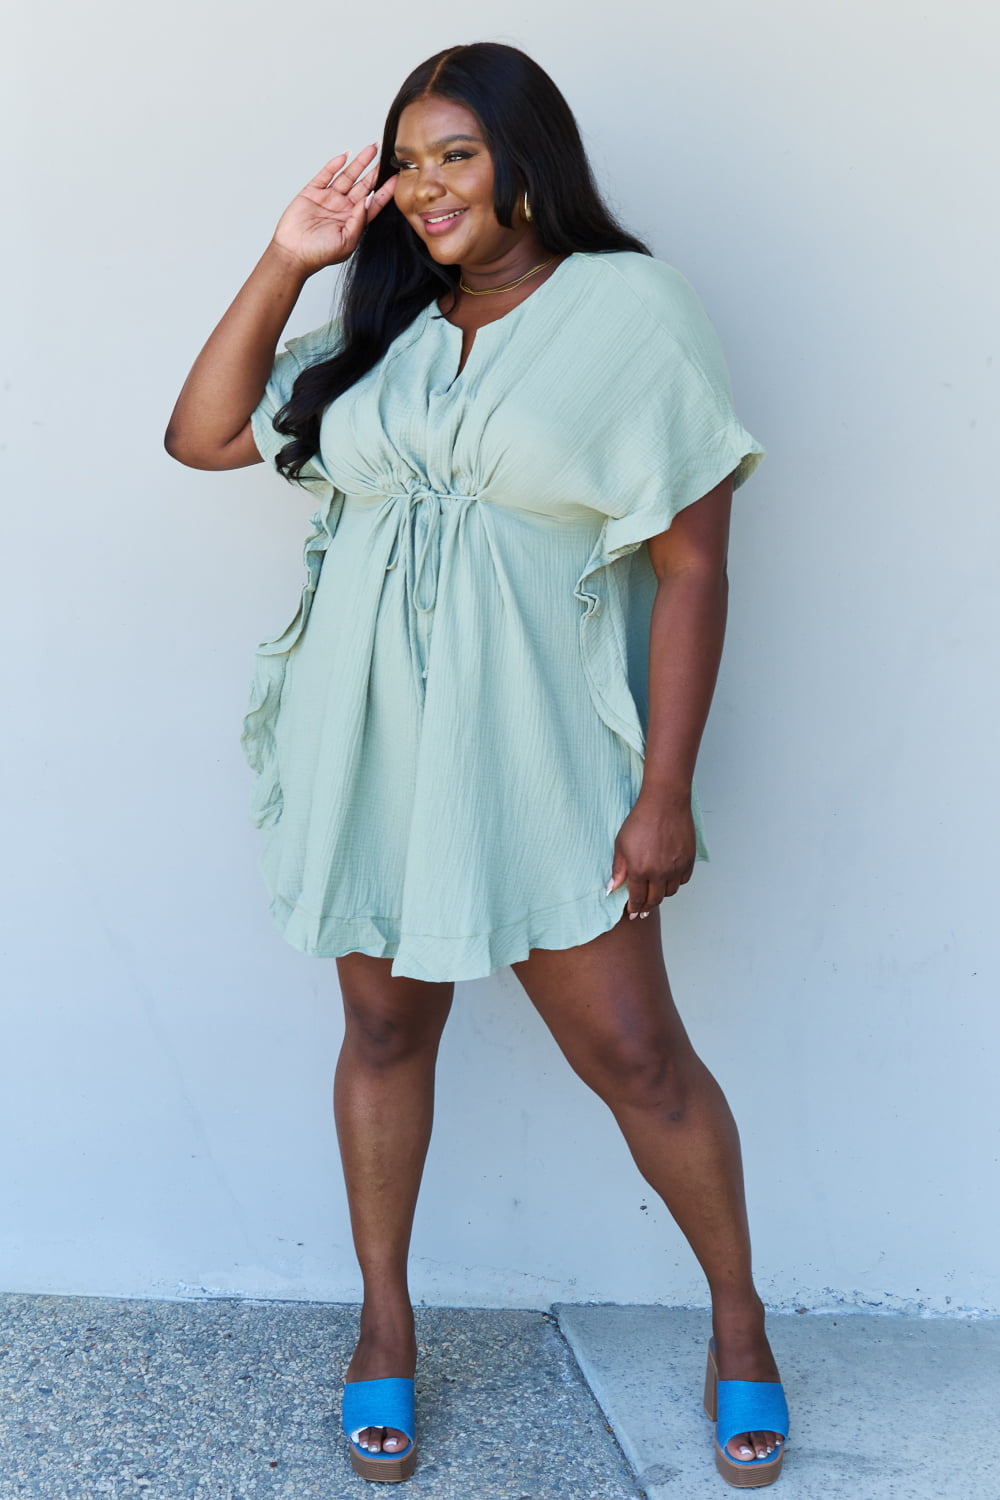 Ninexis Out Of Time Full Size Ruffle Hem Dress with Drawstring Waistband in Light Sage - nailedmoms